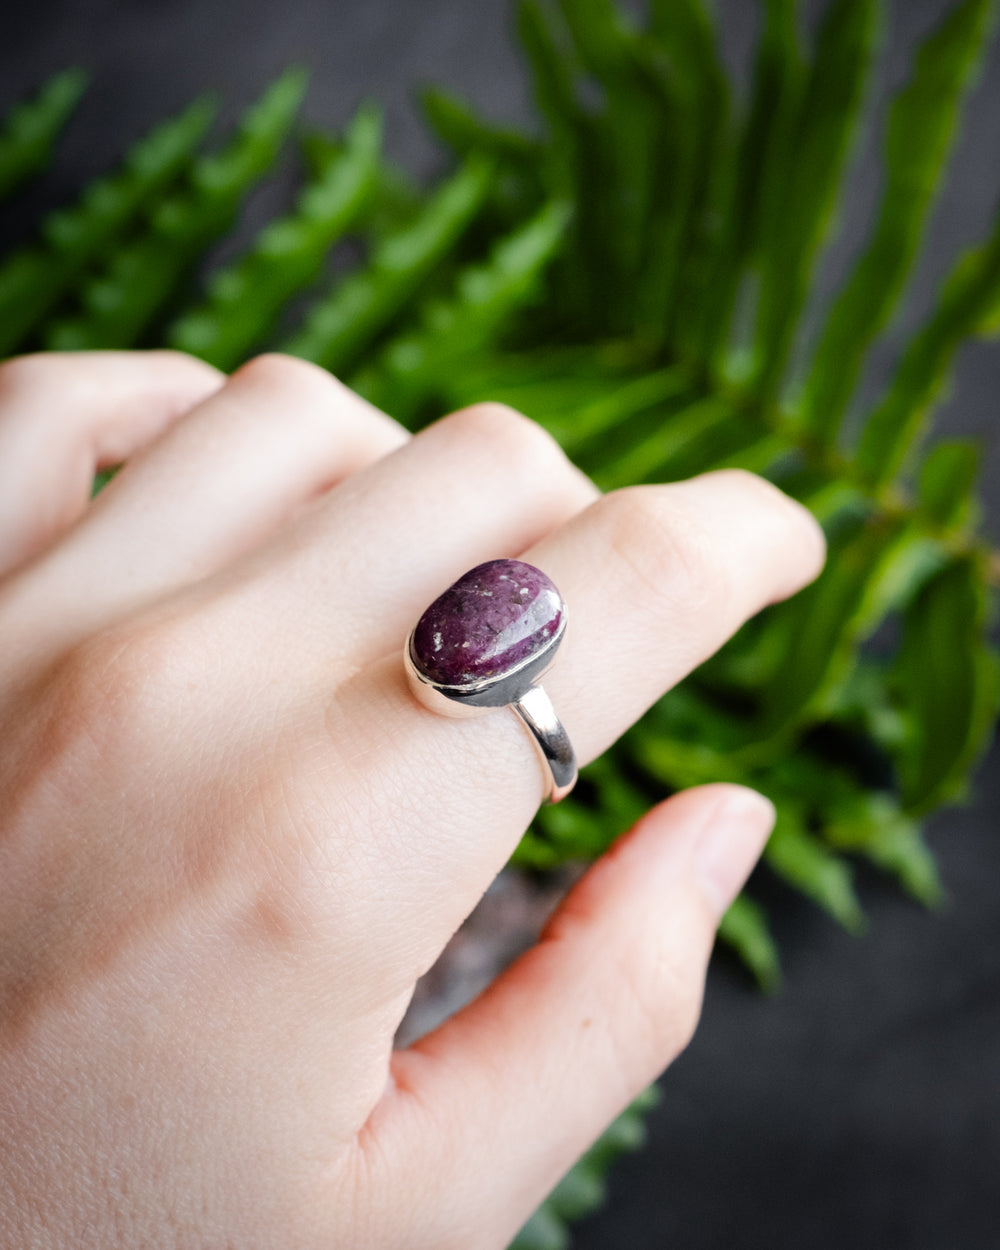 Ruby Ring in Sterling Silver - Size 7 US / O UK - The Healing Pear